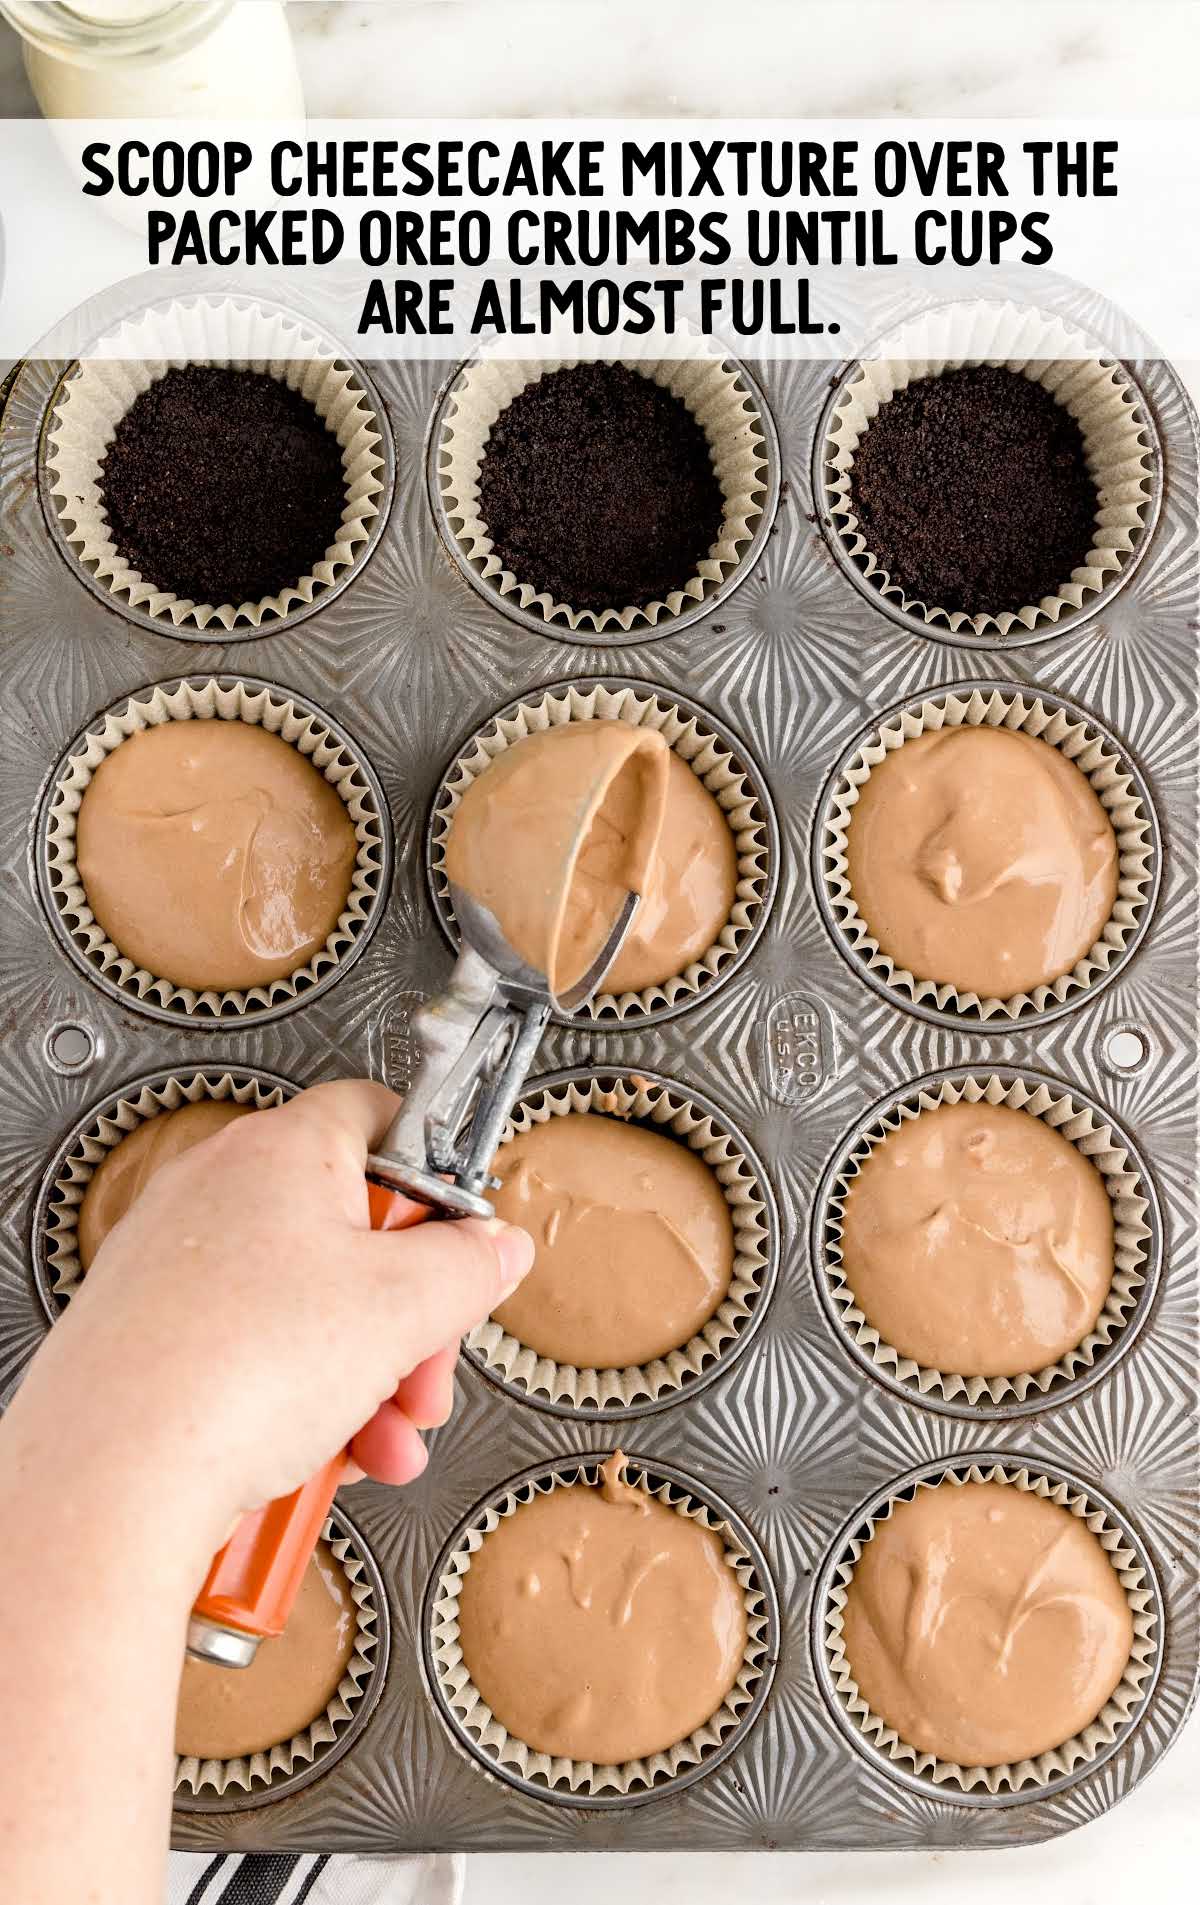 cheesecake mixture scooped over the oreo crumbs in a cupcake baking tray